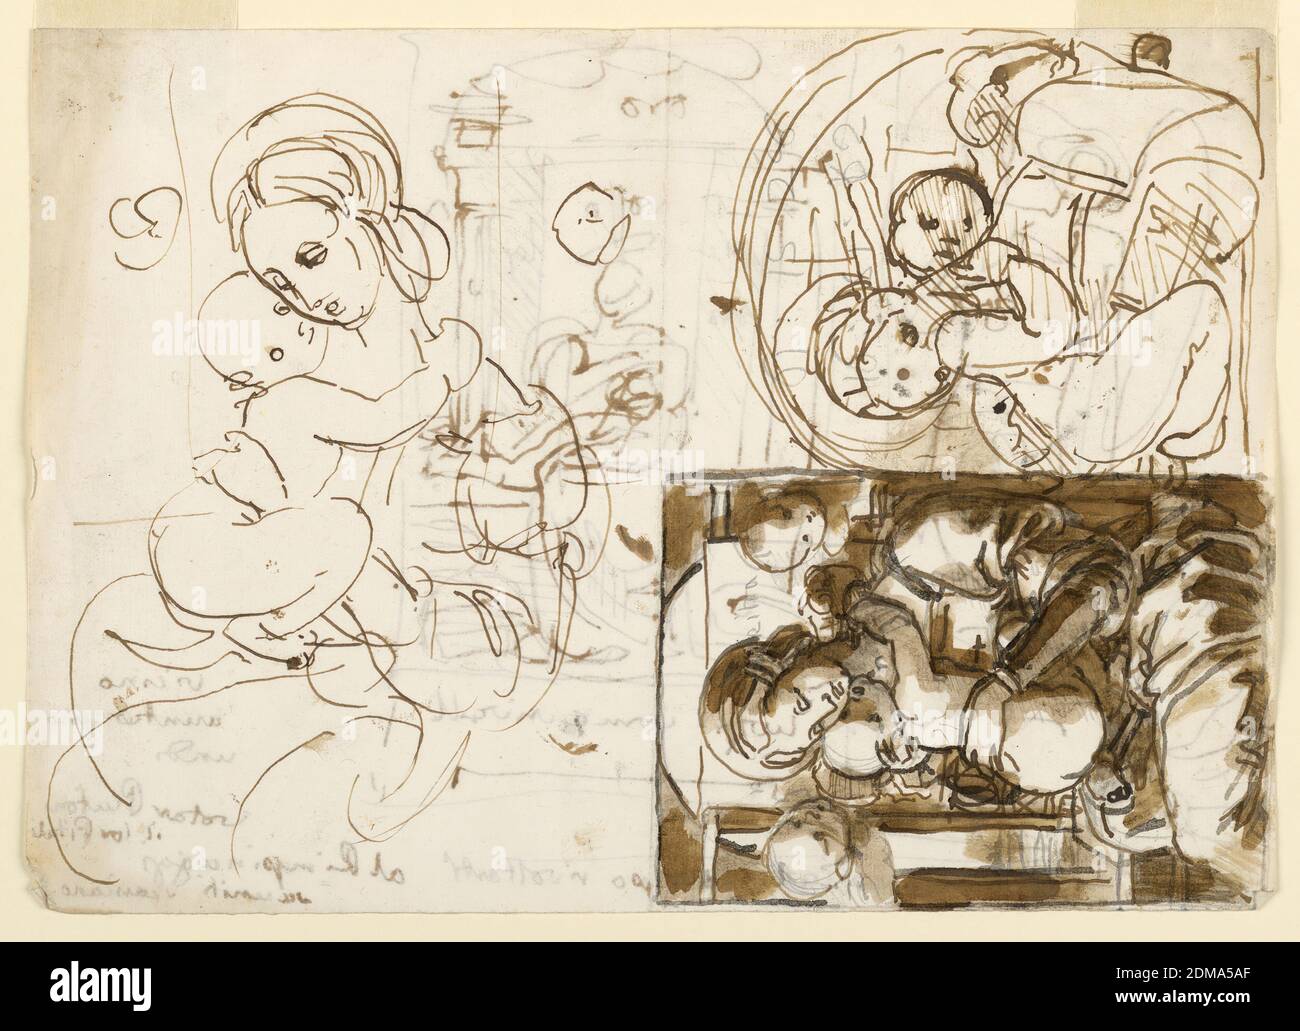 Sketches, The Virgin and Child, Fortunato Duranti, Italian, 1787 - 1863, Pen and ink, brush and sepia wash on paper, Various sketches of the Virgin and Child; that in lower right (perpendicular orientation) being the most complete. Architectural sketch on verso., Rome, Italy, 1820–1850, Drawing Stock Photo